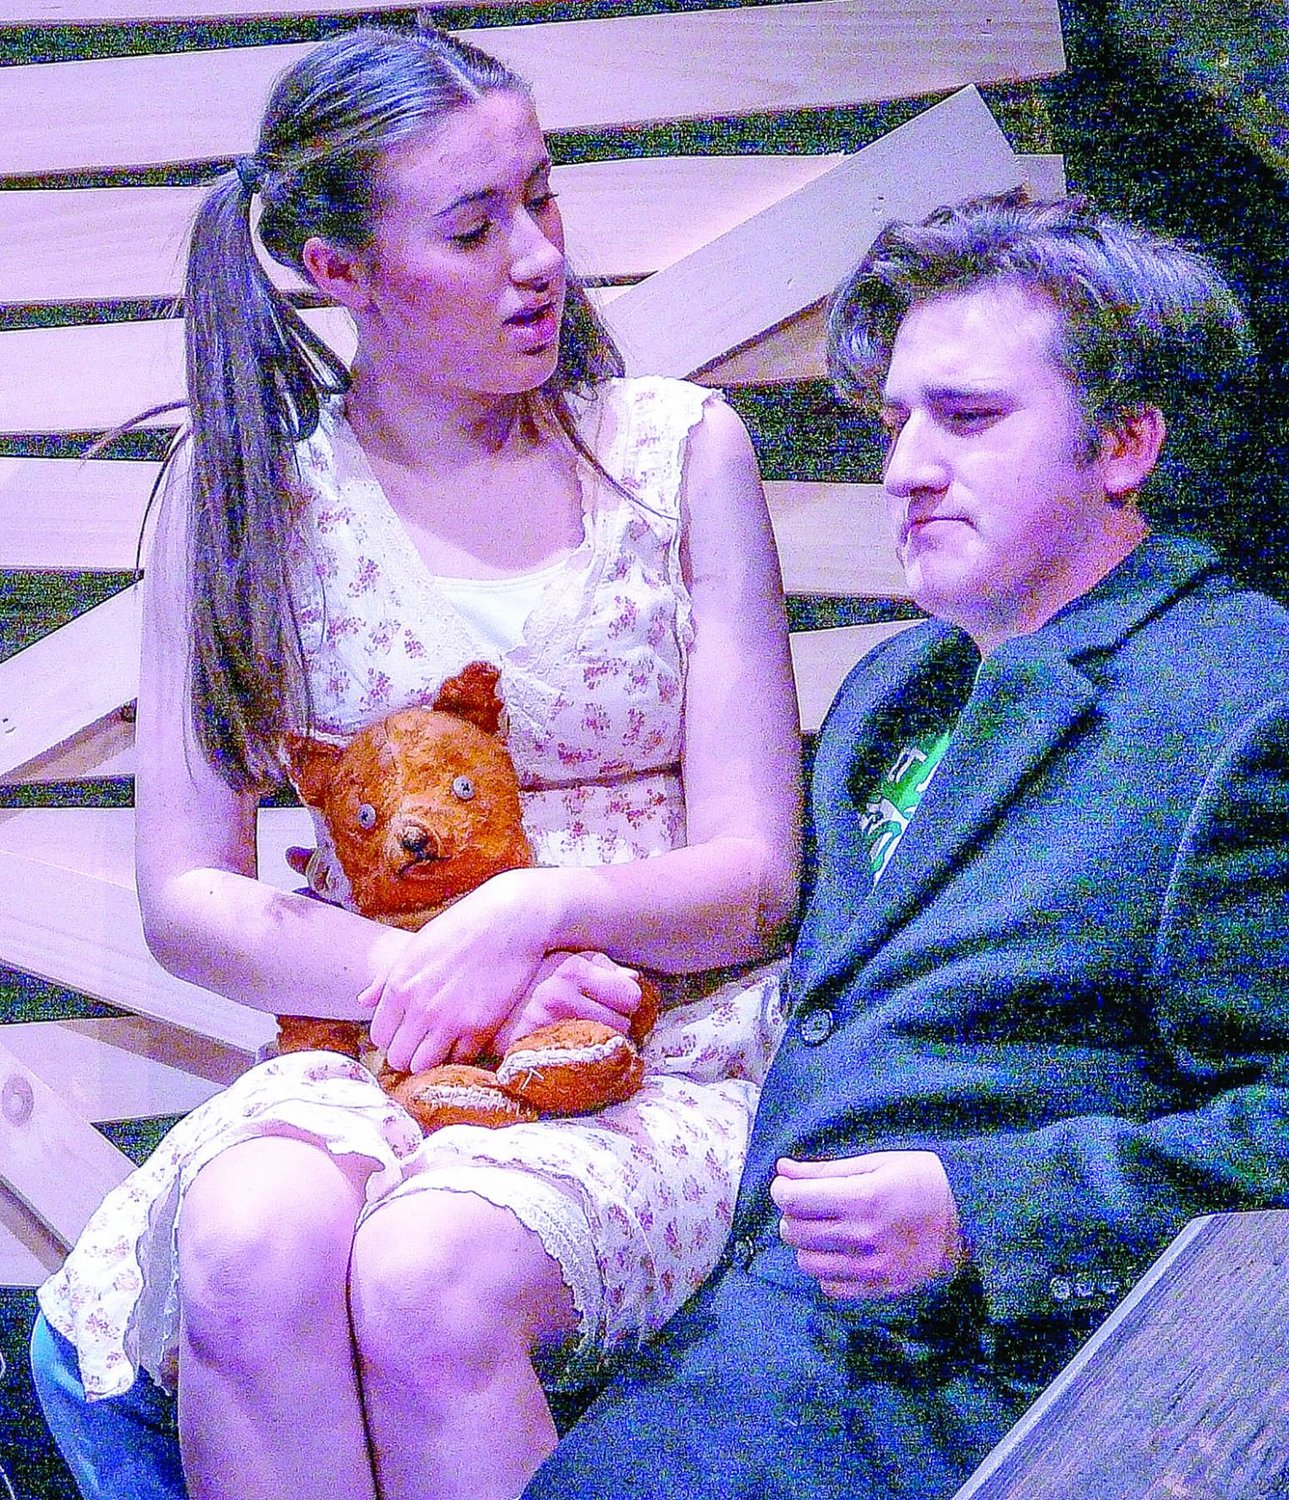 A street urchin played by Keilah Hanley exchanges views with a police officer, portrayed by Will Pearce in Delaware Valley High School’s production of “Urinetown,” which will be presented Feb. 28 to March 2.